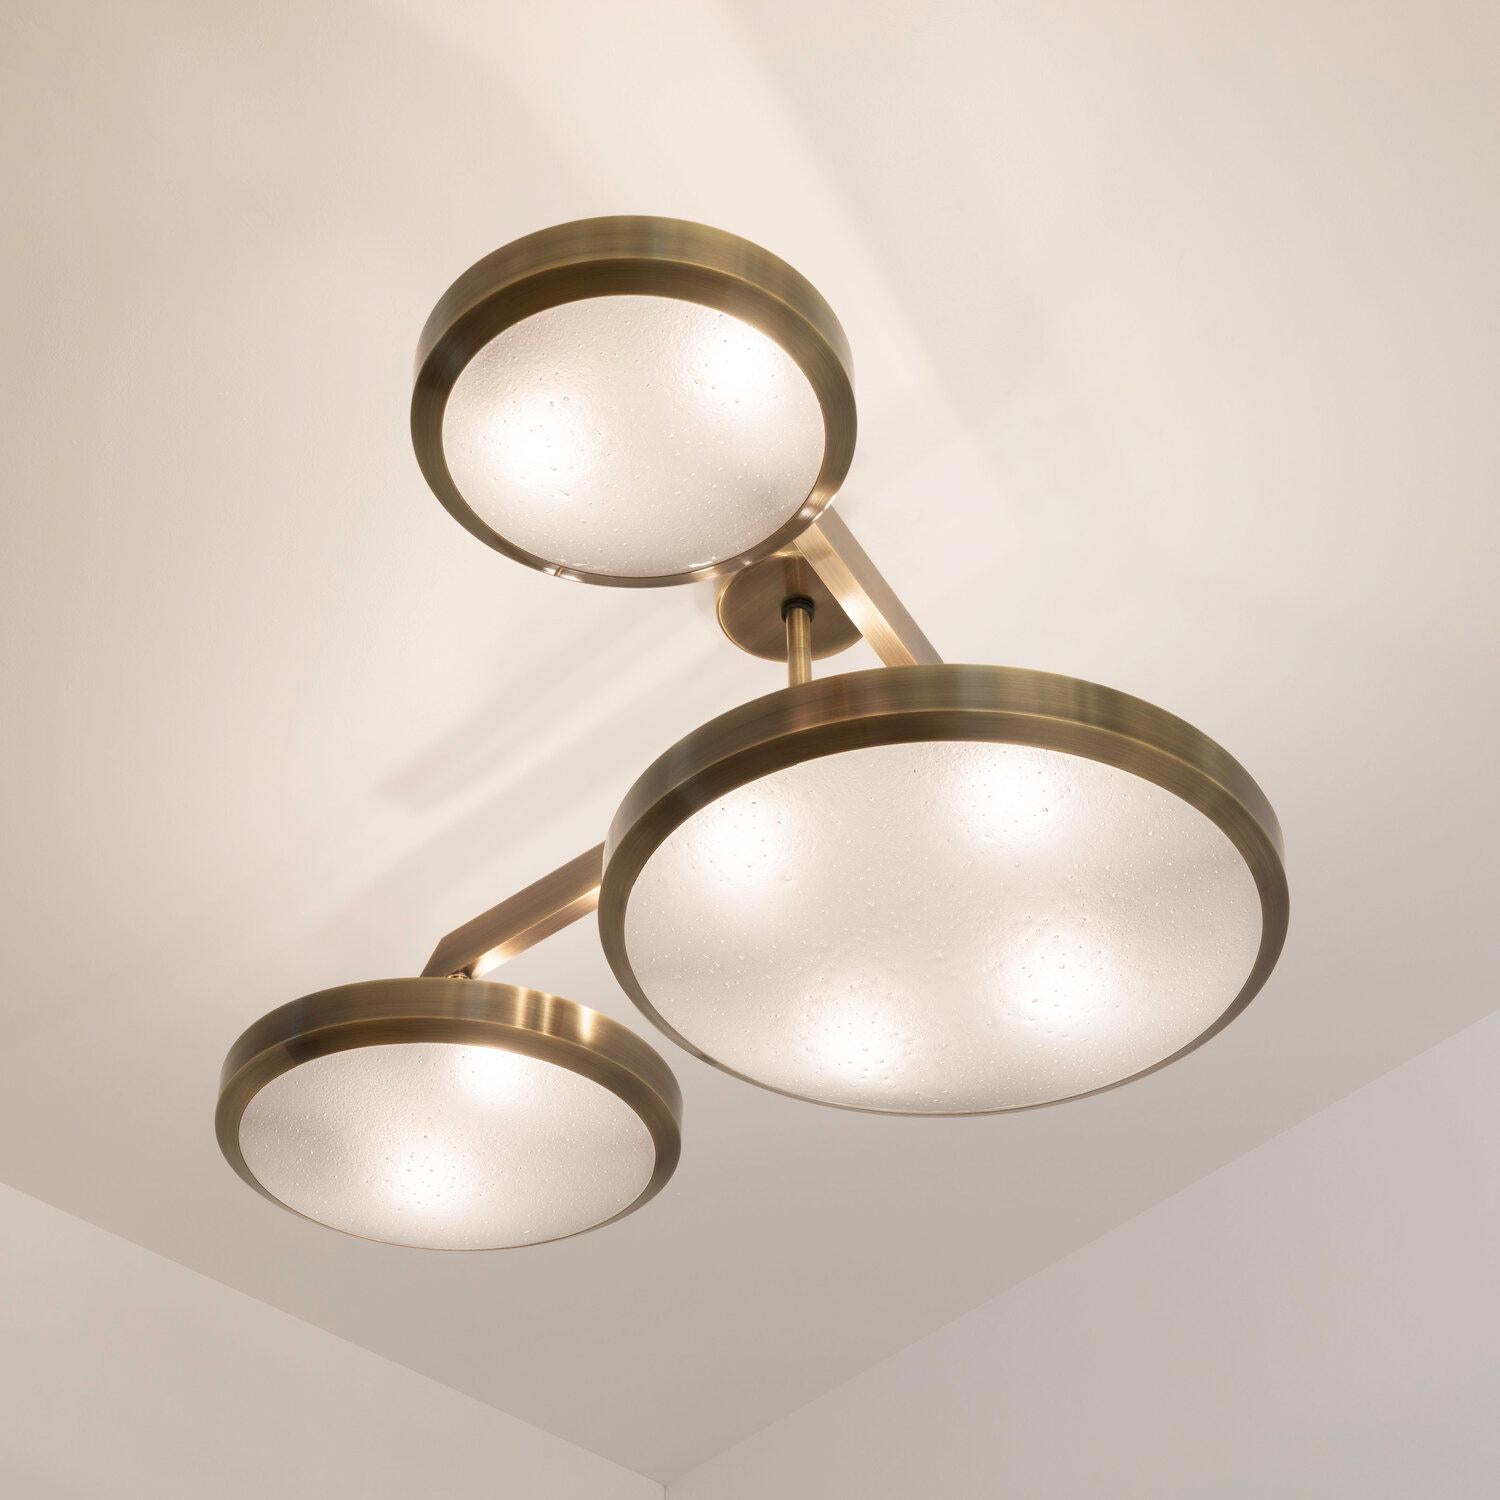 Zeta Ceiling Light by Gaspare Asaro - Satin Brass Finish For Sale 1